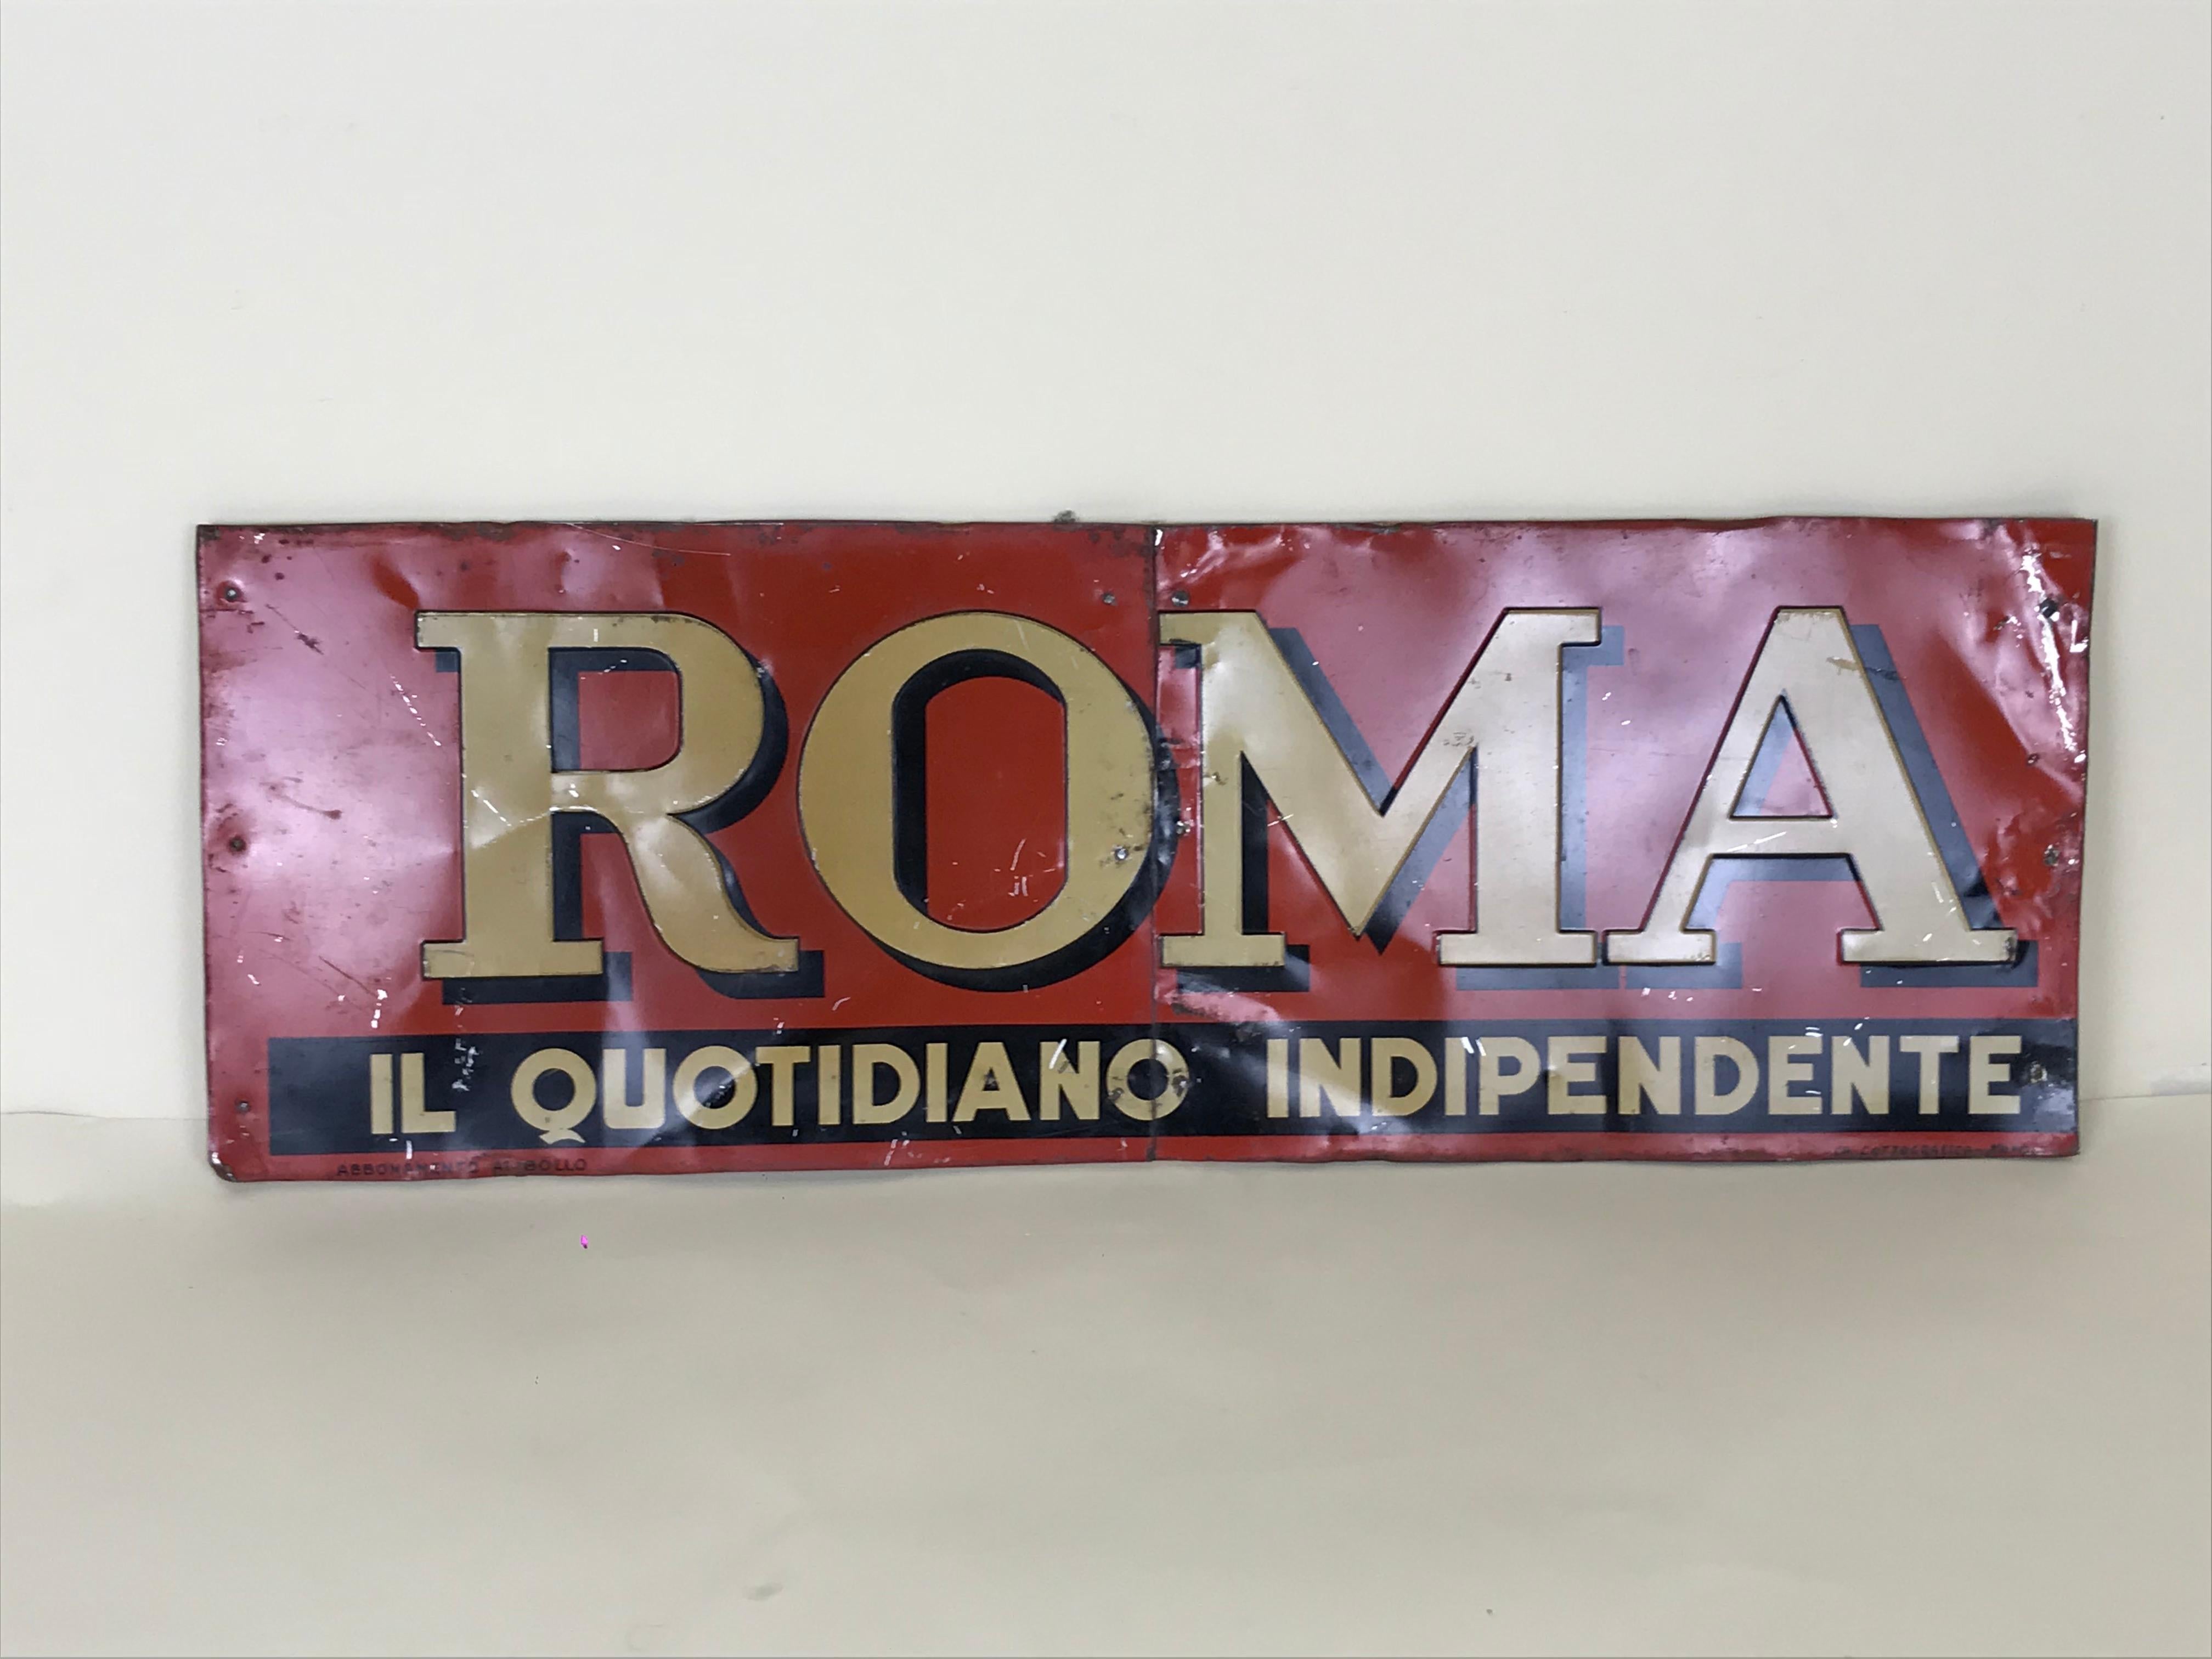 1950s transfer printed red and cream Roma newspaper sign.

The metal sheet sign is divided in two parts and assembled on a wooden board.

The letters of the newspaper logo °Roma° are relief printed while the slogan 